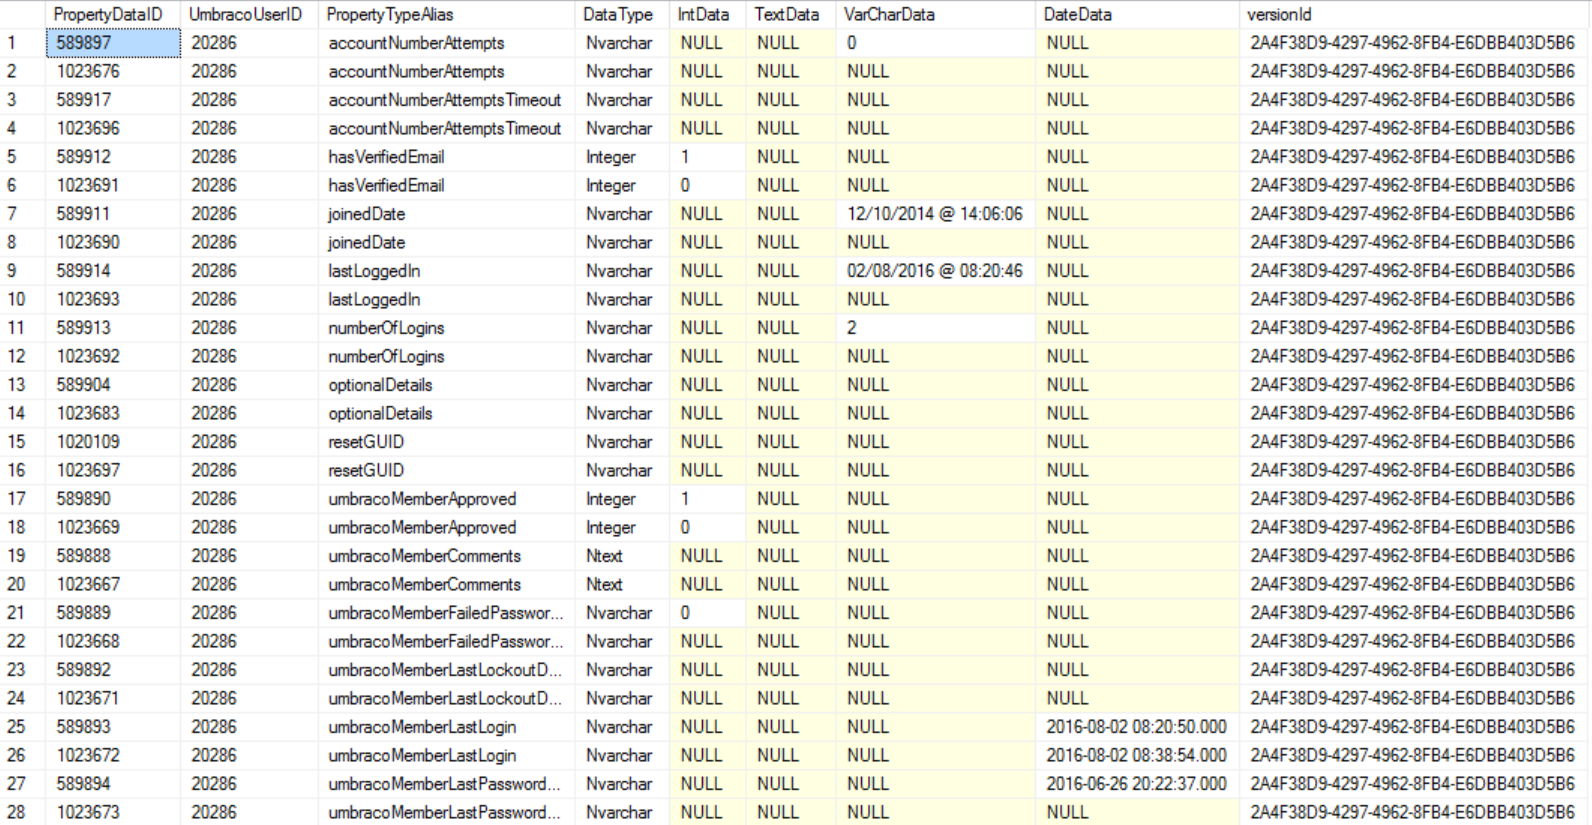 This is a screenshot of the data showing a member with duplicate properties